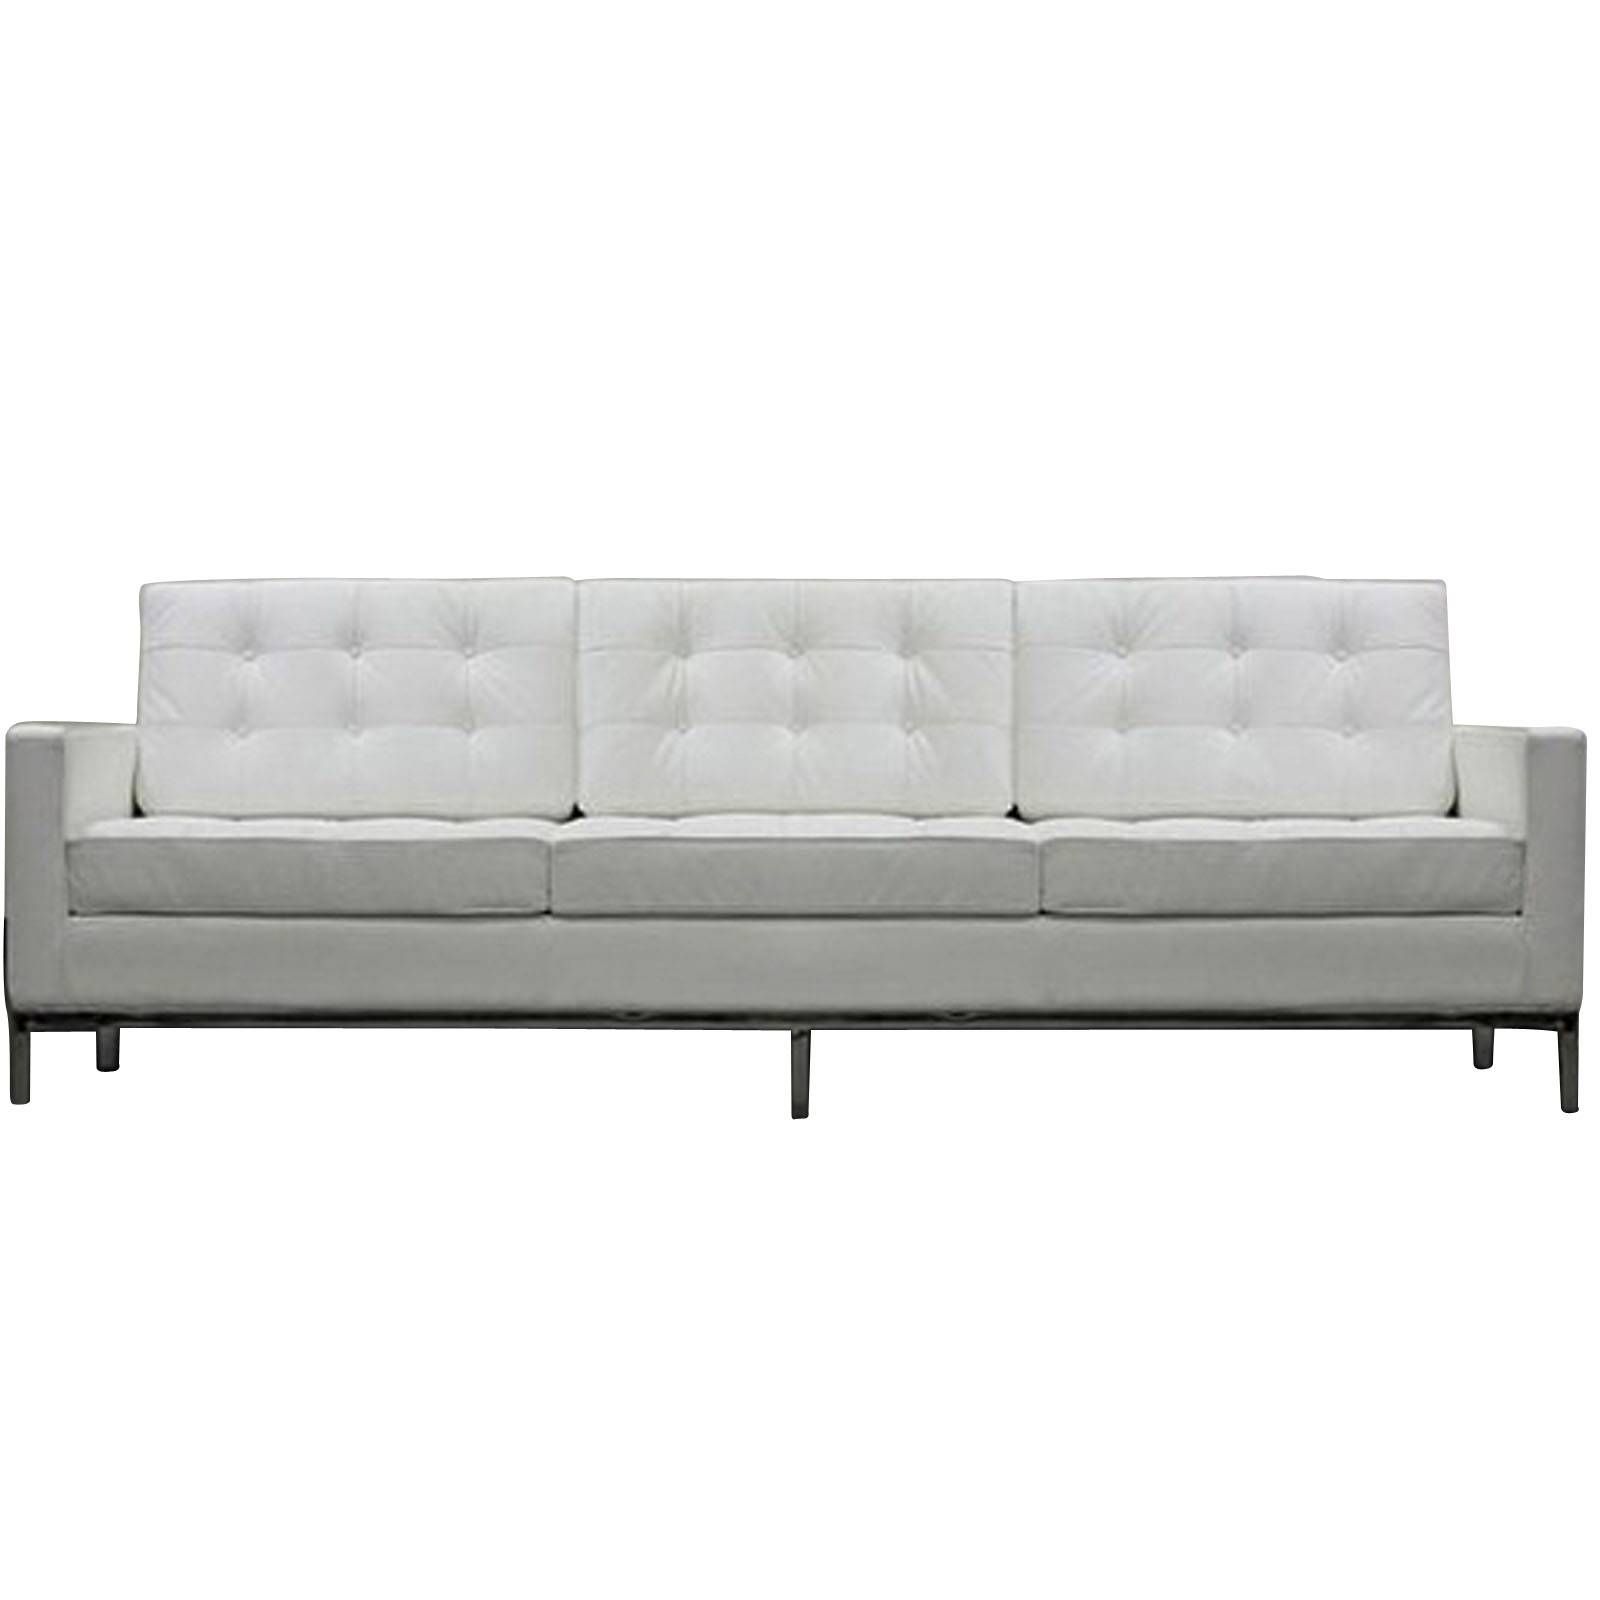 Florence Knoll Style Sofa Couch – Leather Throughout Florence Knoll Style Sofas (View 7 of 25)